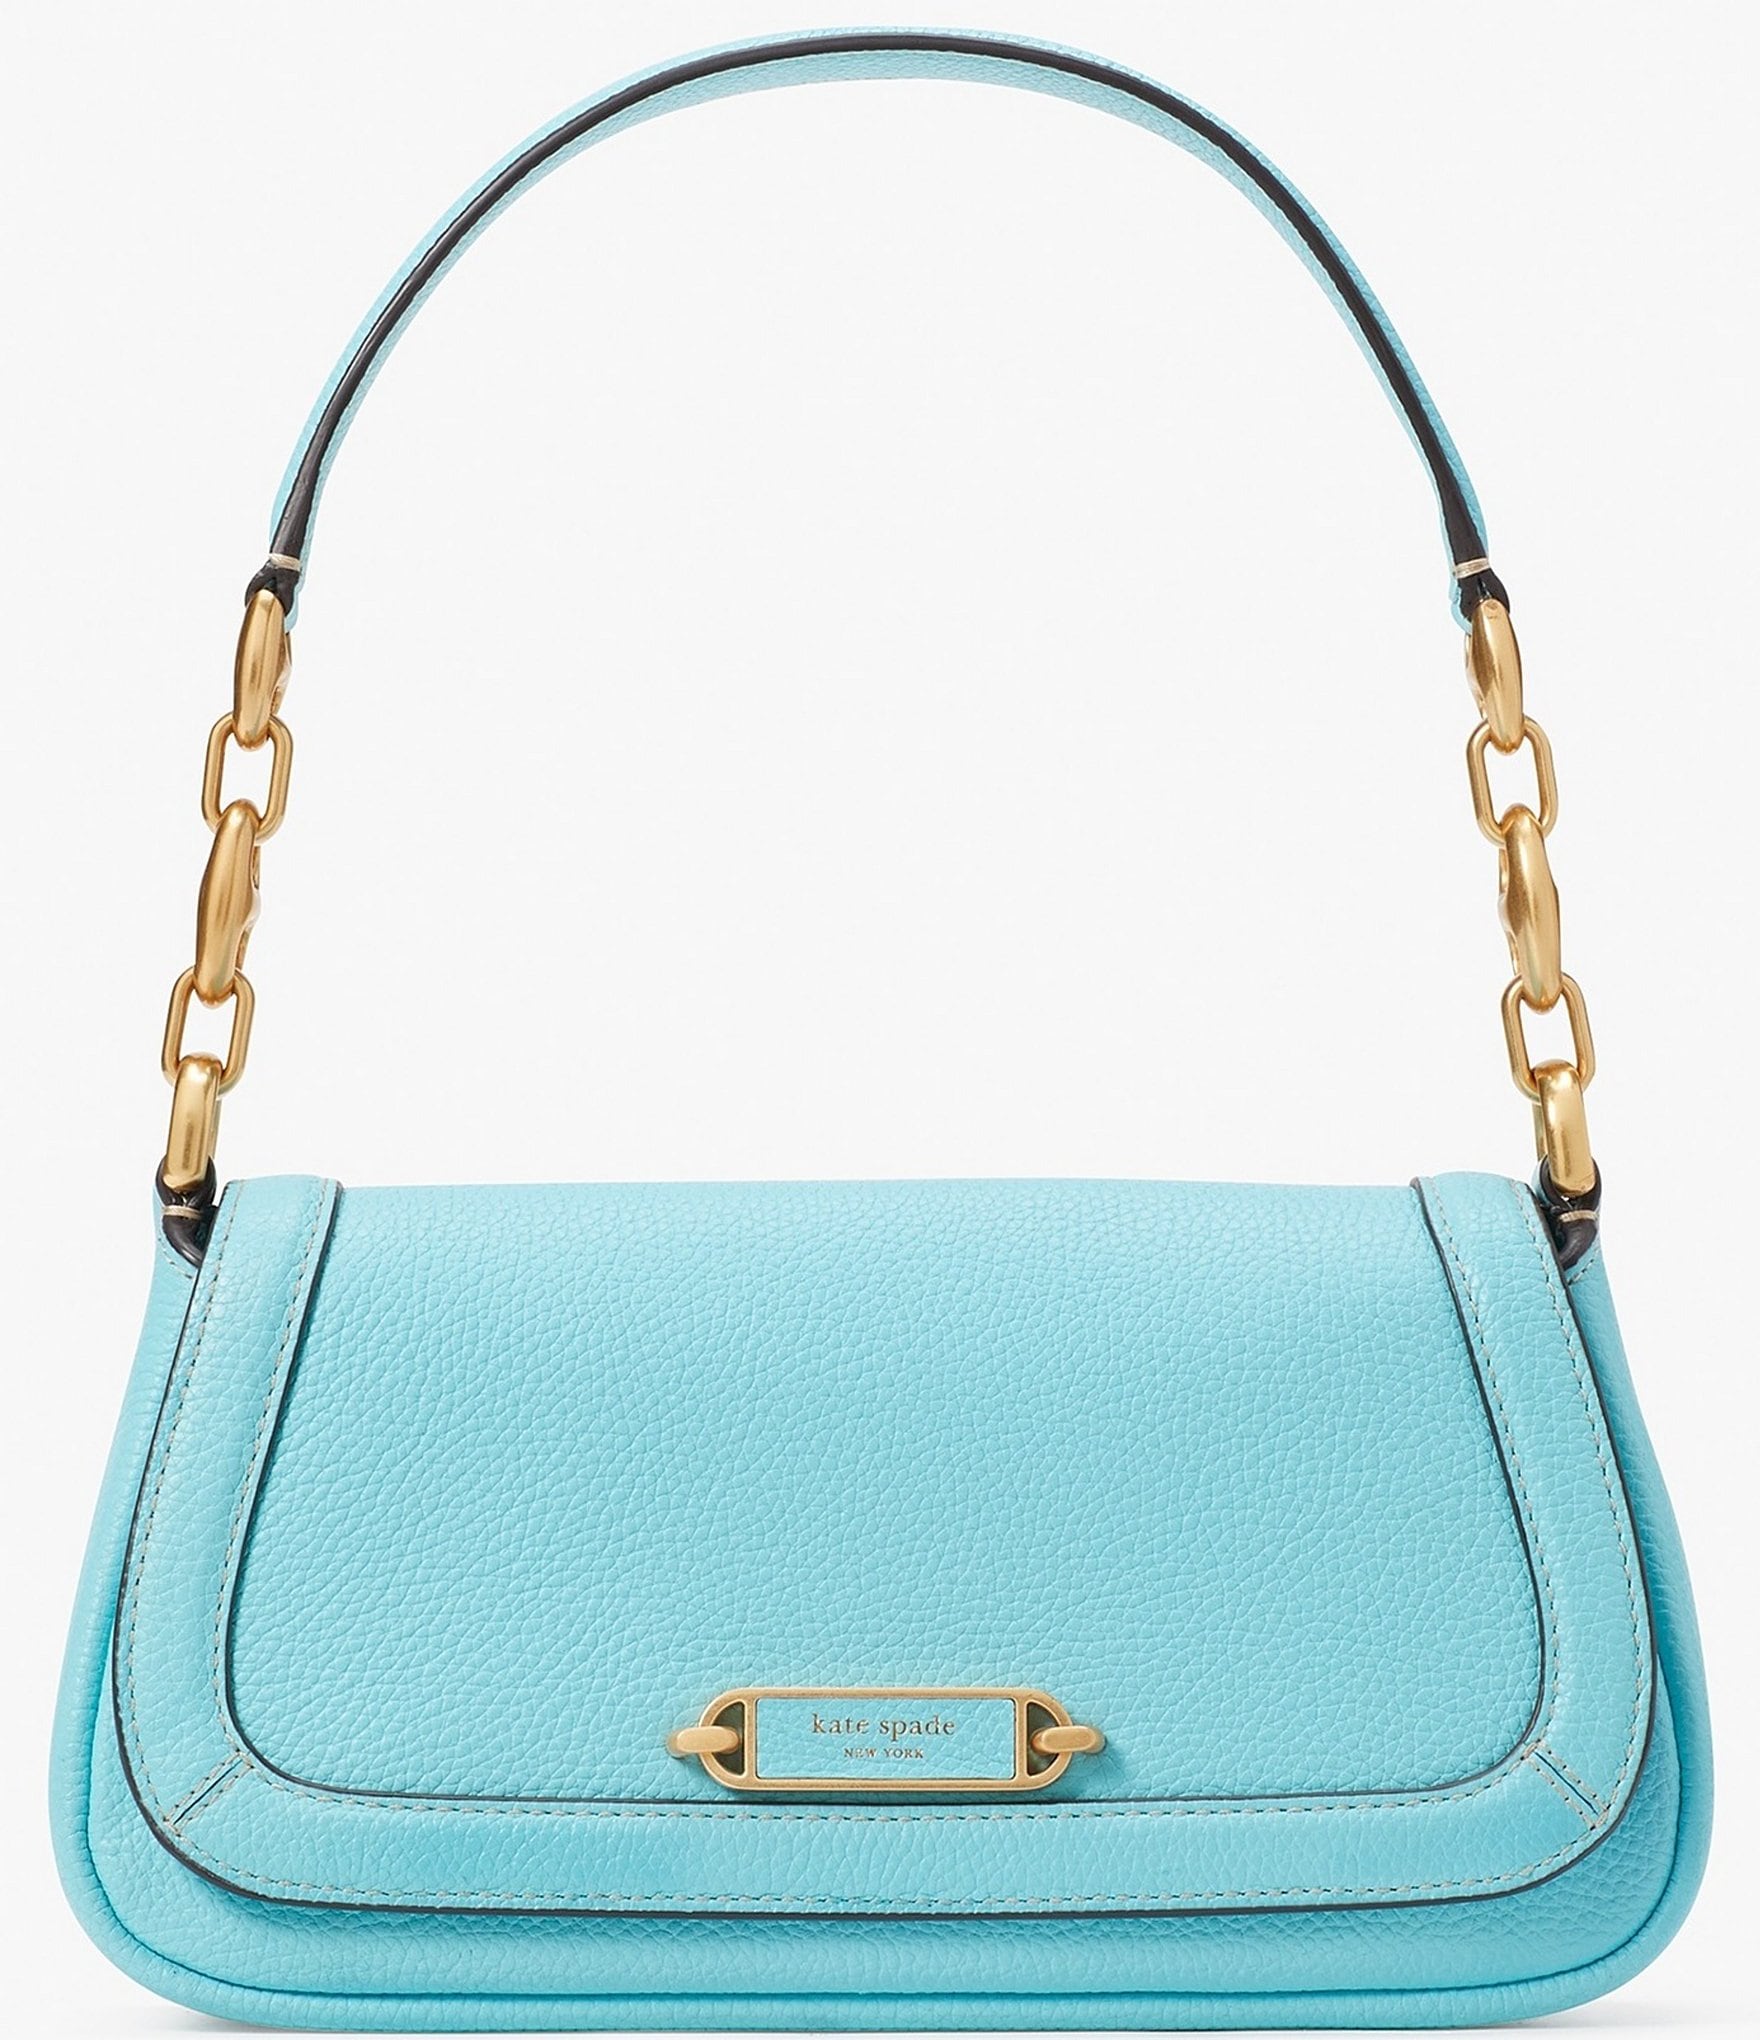 kate spade new york Gramercy Pebbled Leather Small Flap Shoulder Bag ...